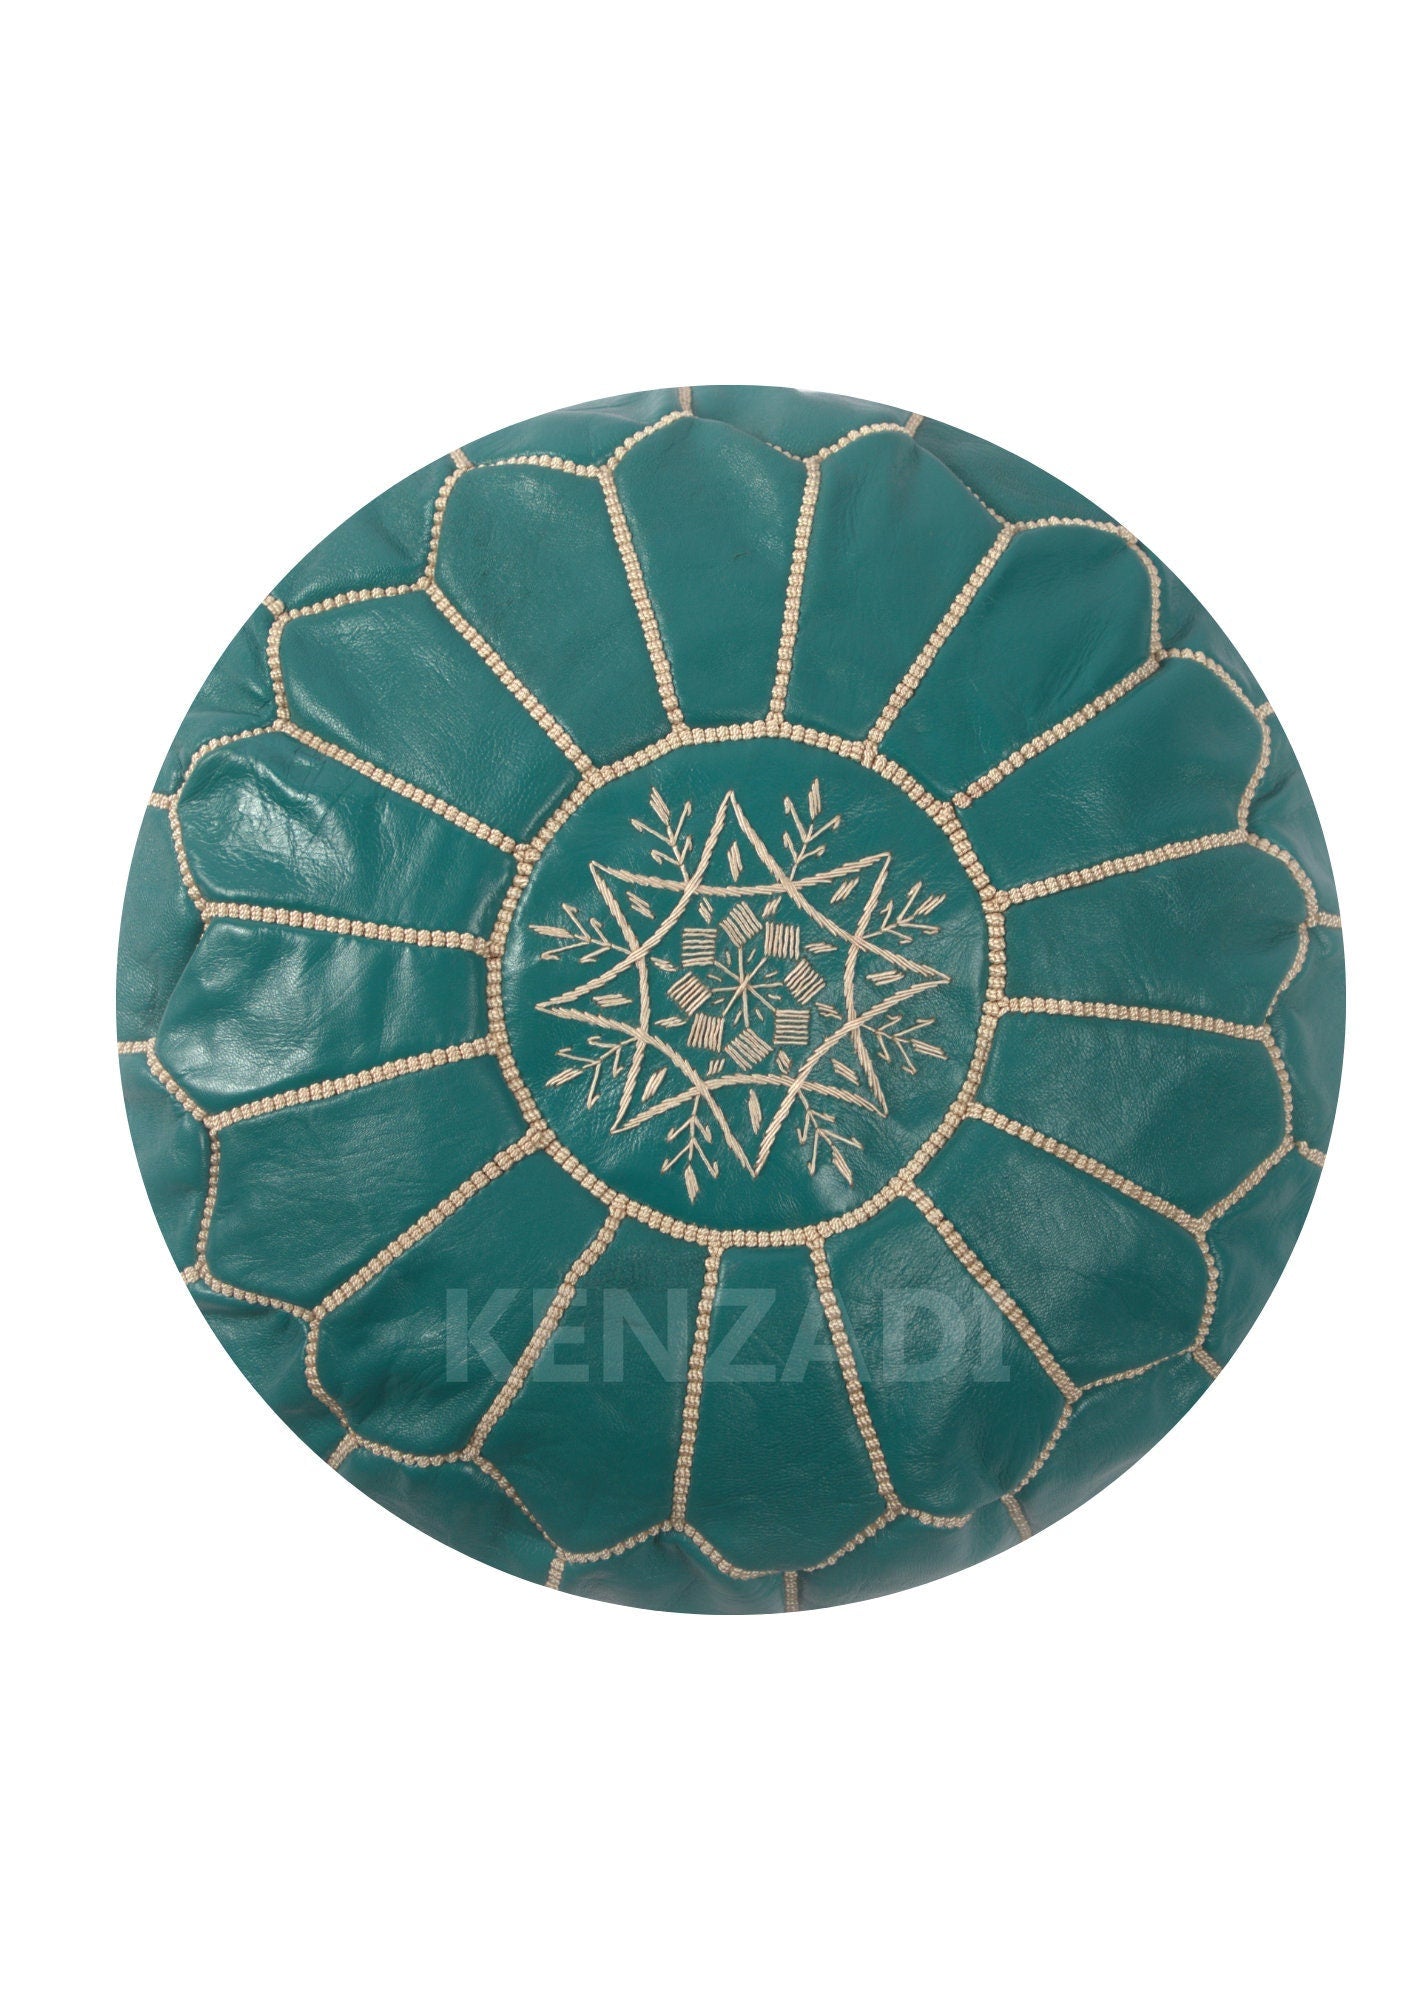 Handmade Moroccan leather pouf with turquoise leather and beige embroidery